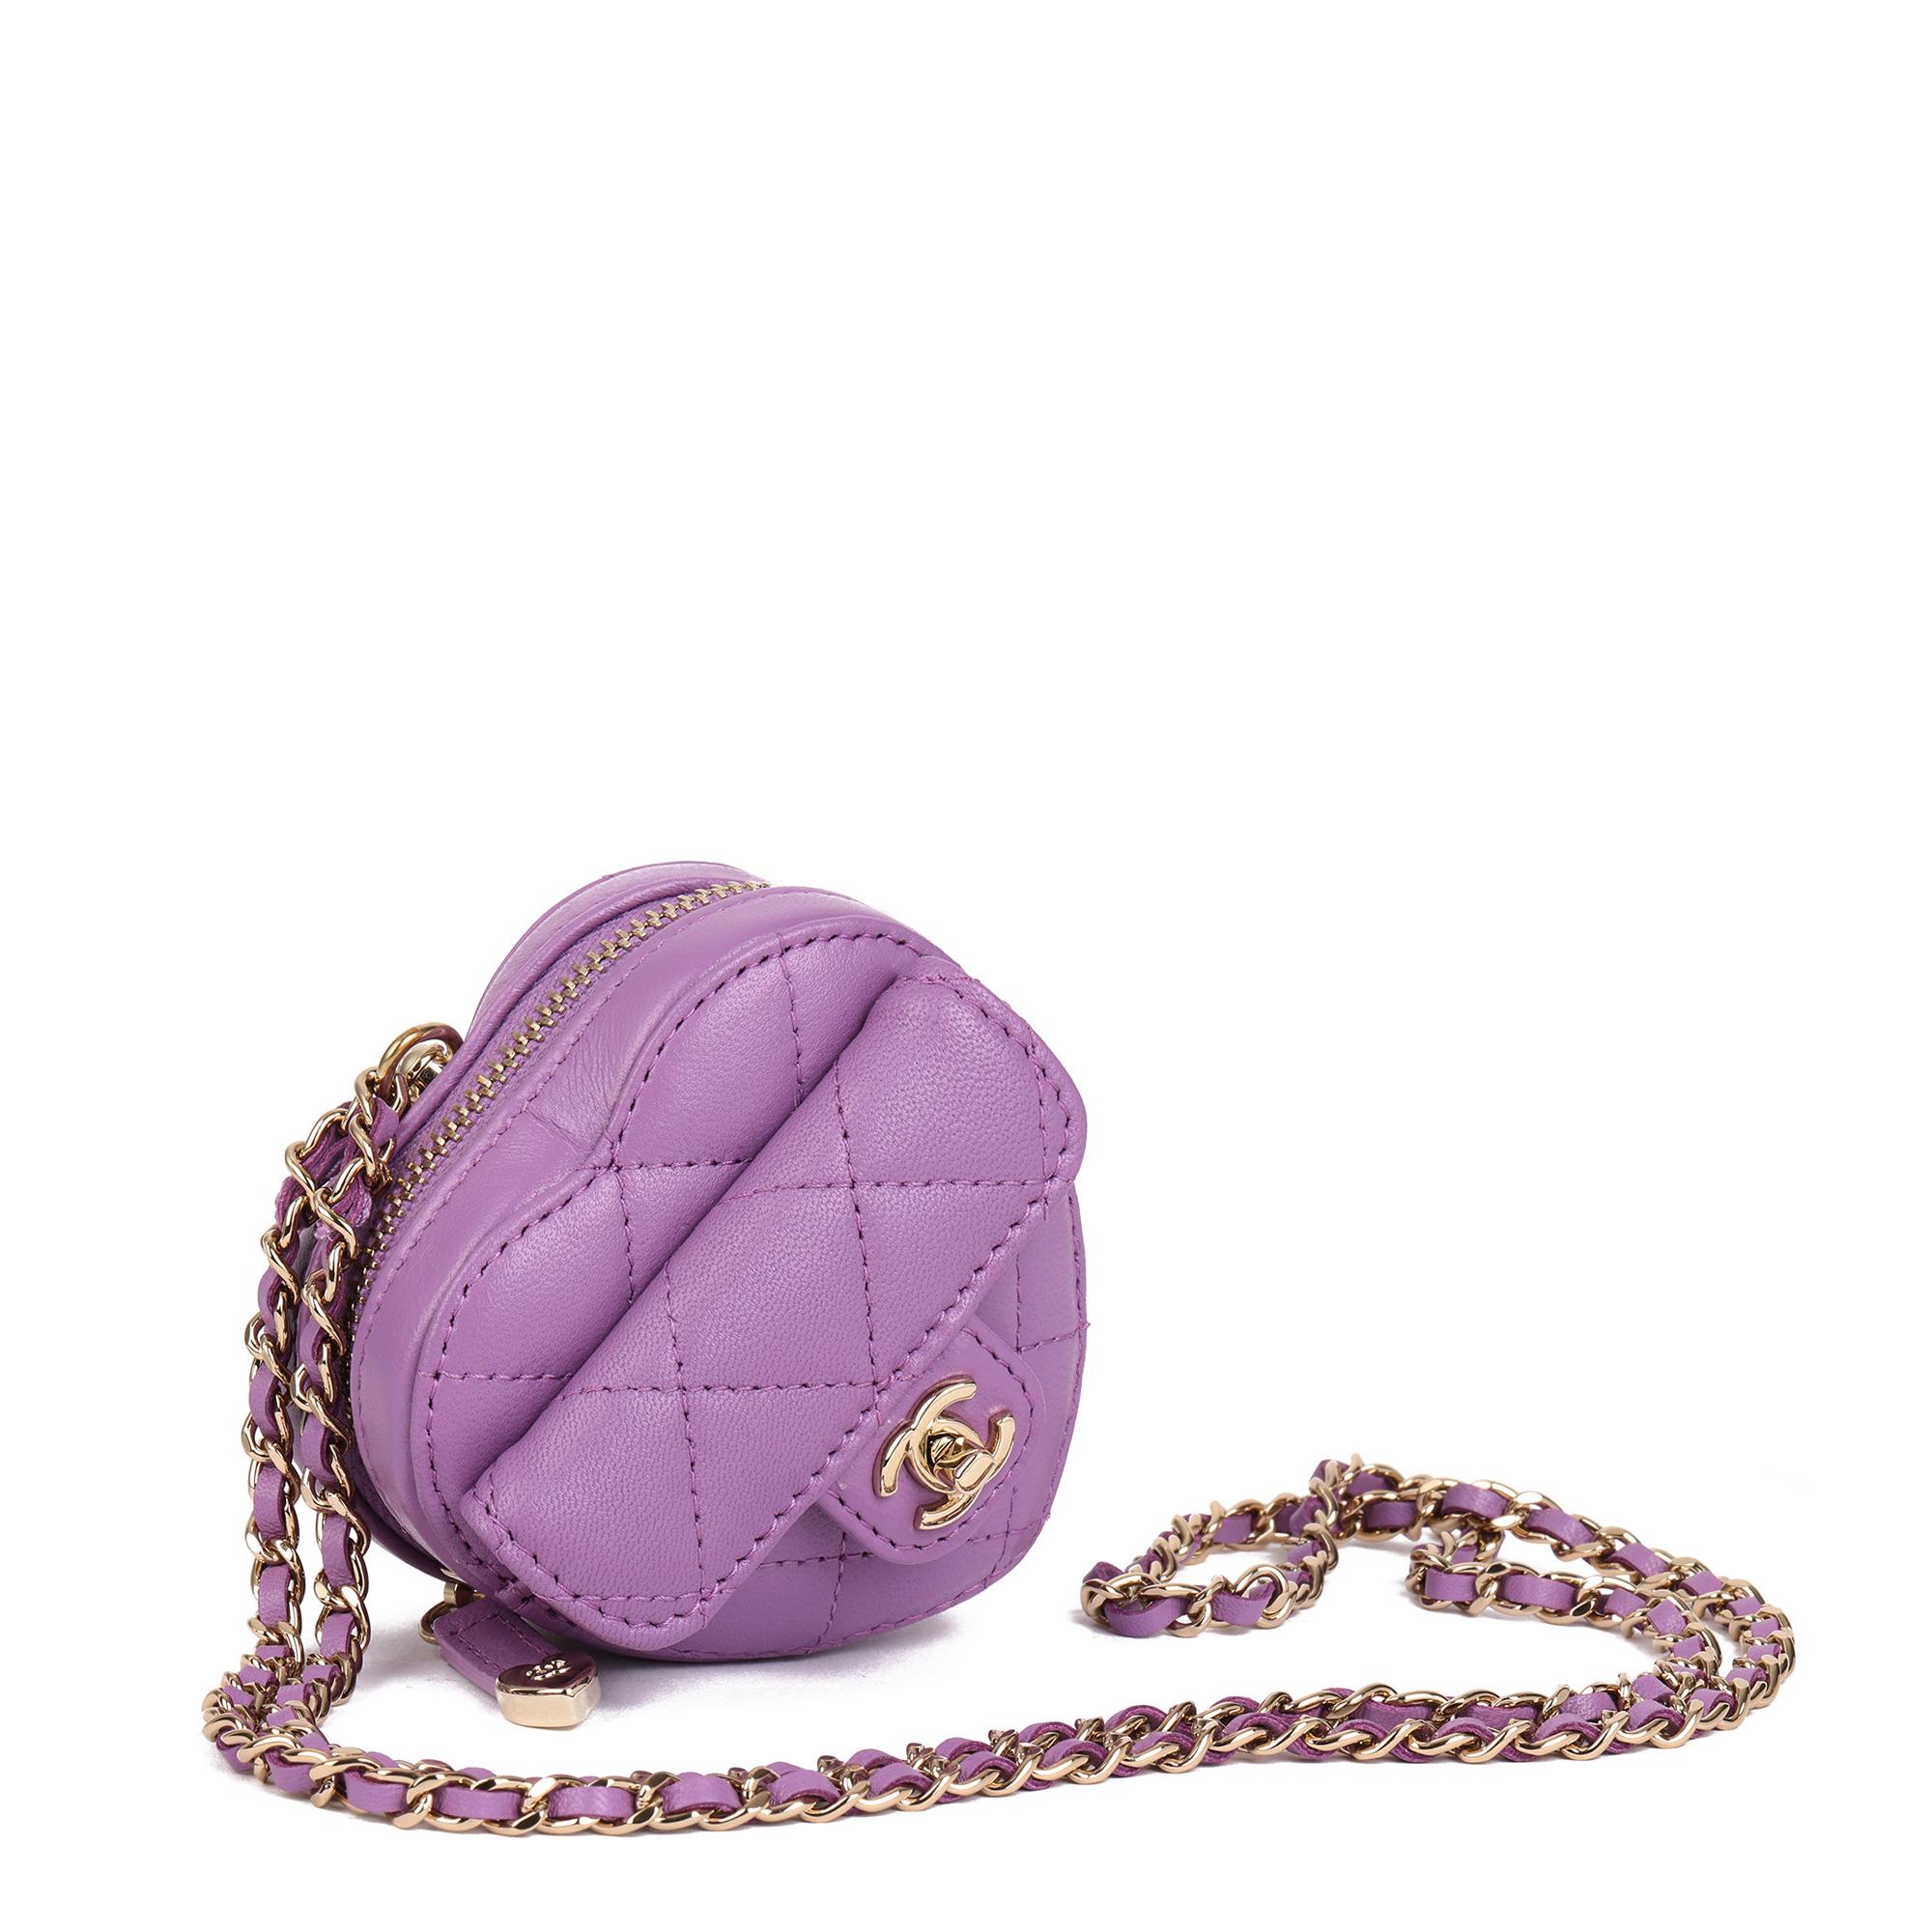 CHANEL
Purple Quilted Lambskin Micro Love Heart

Xupes Reference: CB726
Serial Number: 32050395
Age (Circa): 2022
Accompanied By: Chanel Dust Bag, Box, Authenticity Card, Care Booklet
Authenticity Details: Authenticity Card, Serial Sticker (Made in